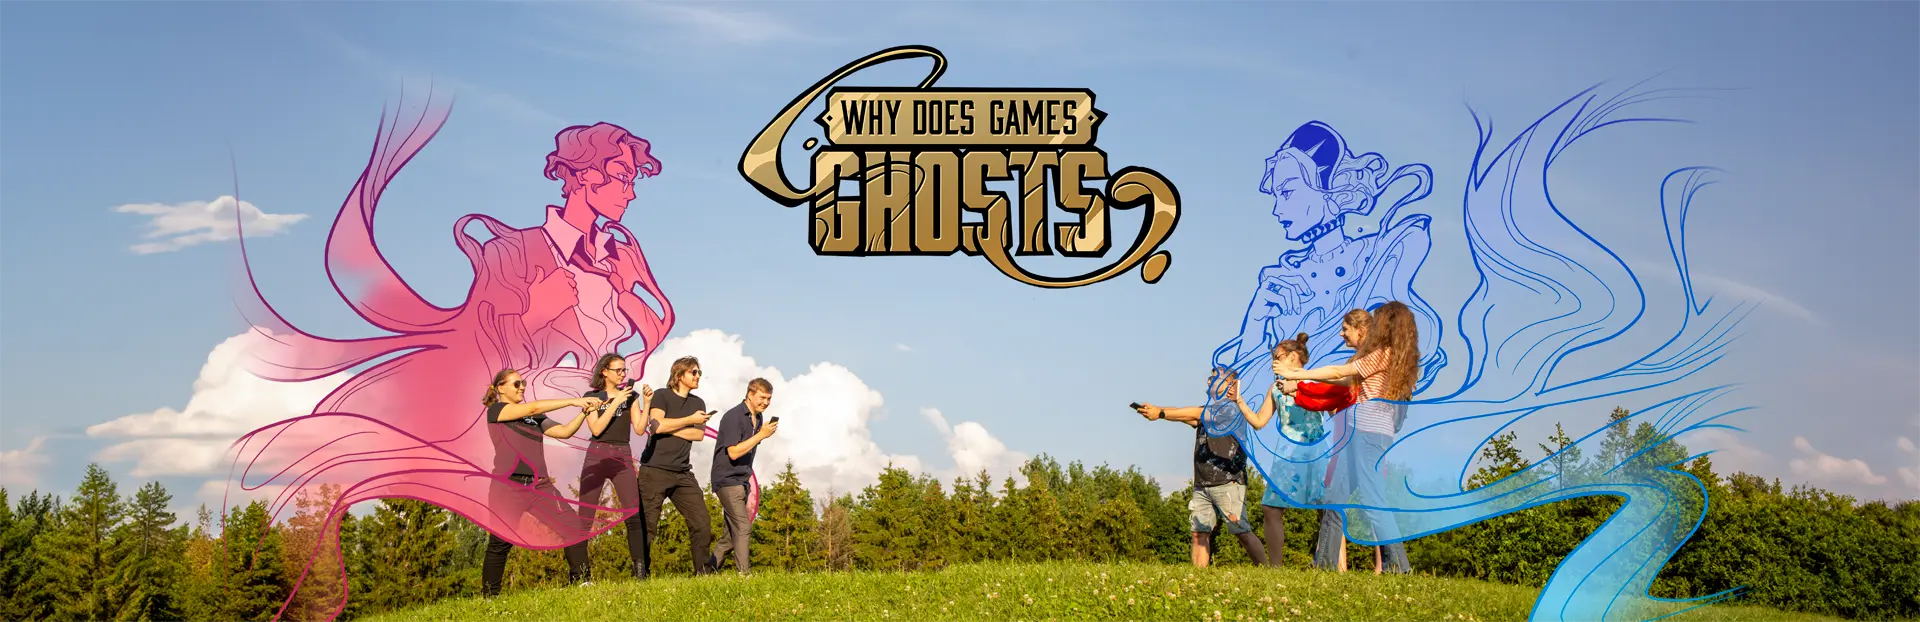 Why Does Games Ghosts Logo